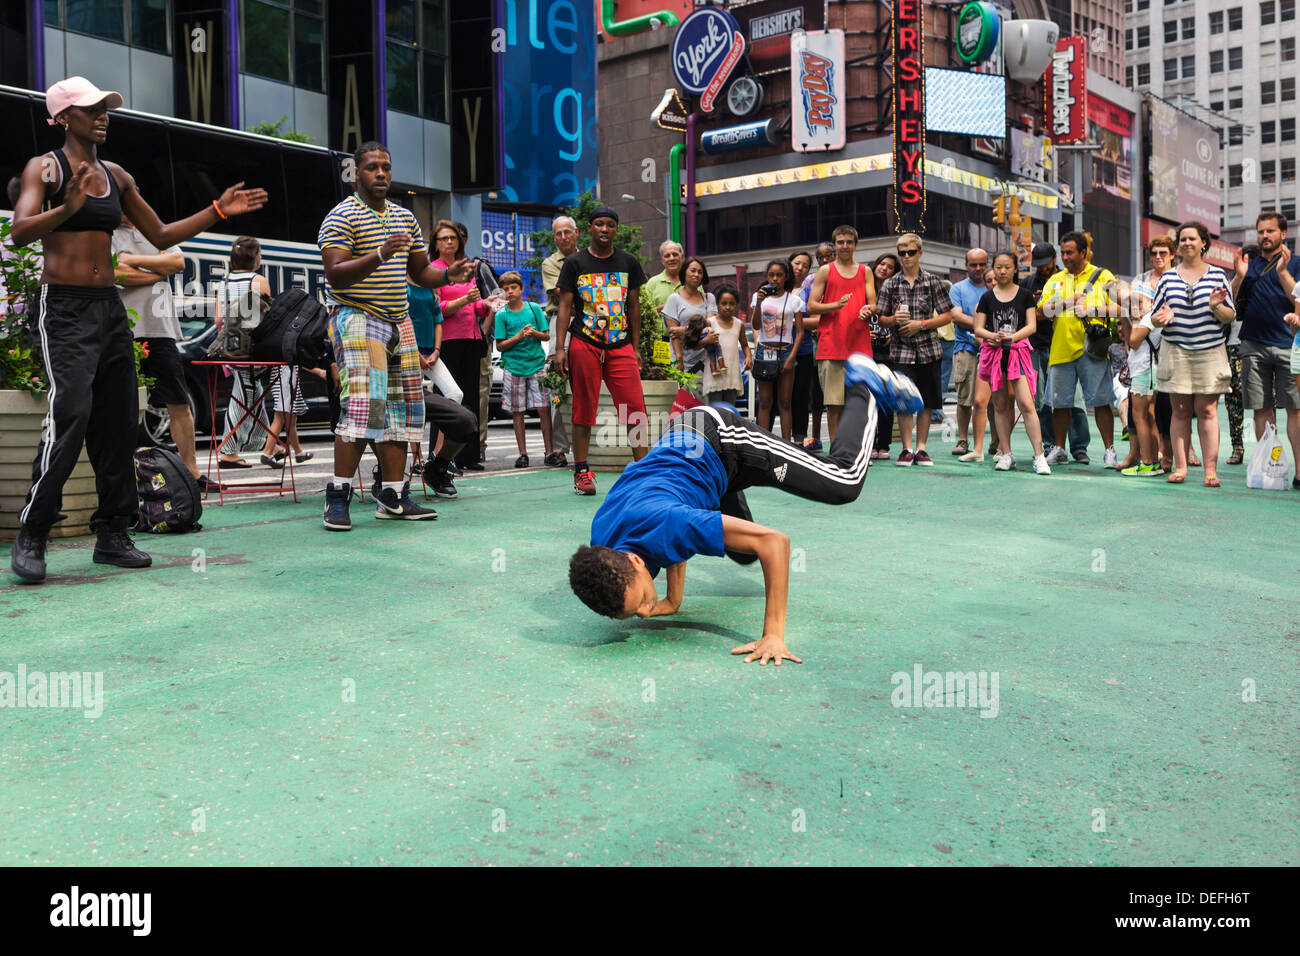 Street dance performance in Times Square, New York City, New York, United States Stock Photo